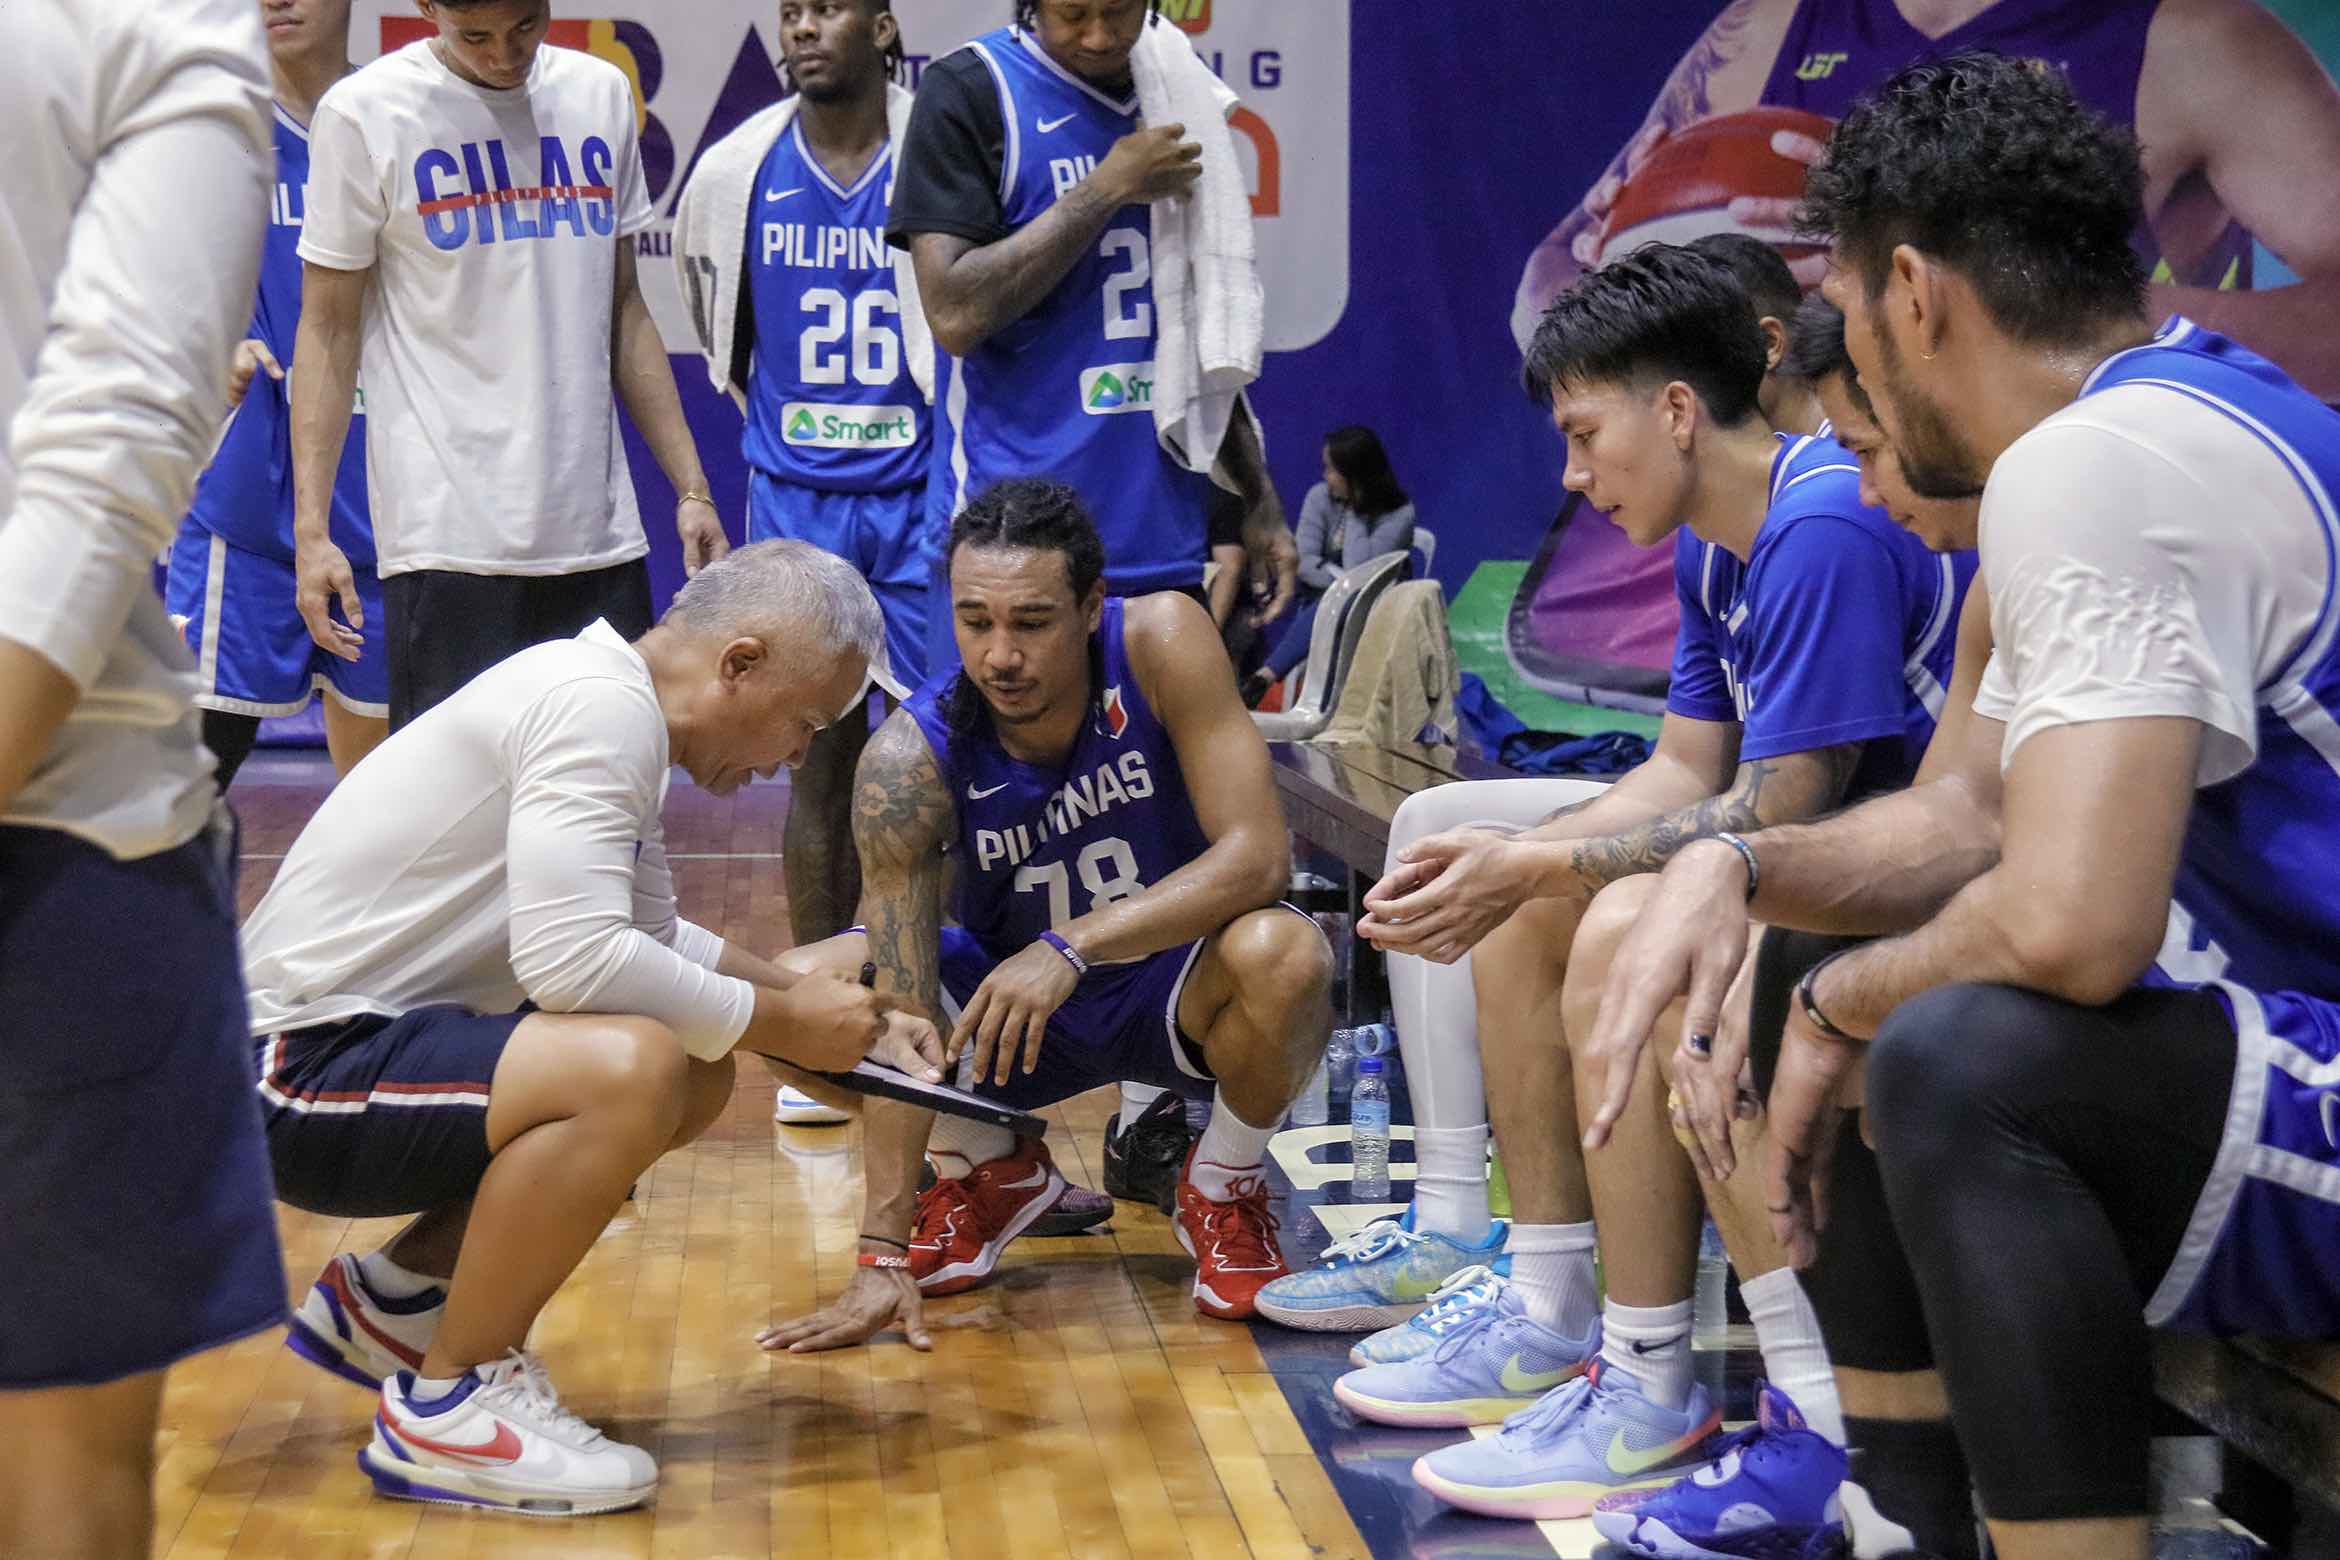 Gilas Pilipinas head coach Chot Reyes leading the team through training sessions ahead of the 2023 FIBA World Cup